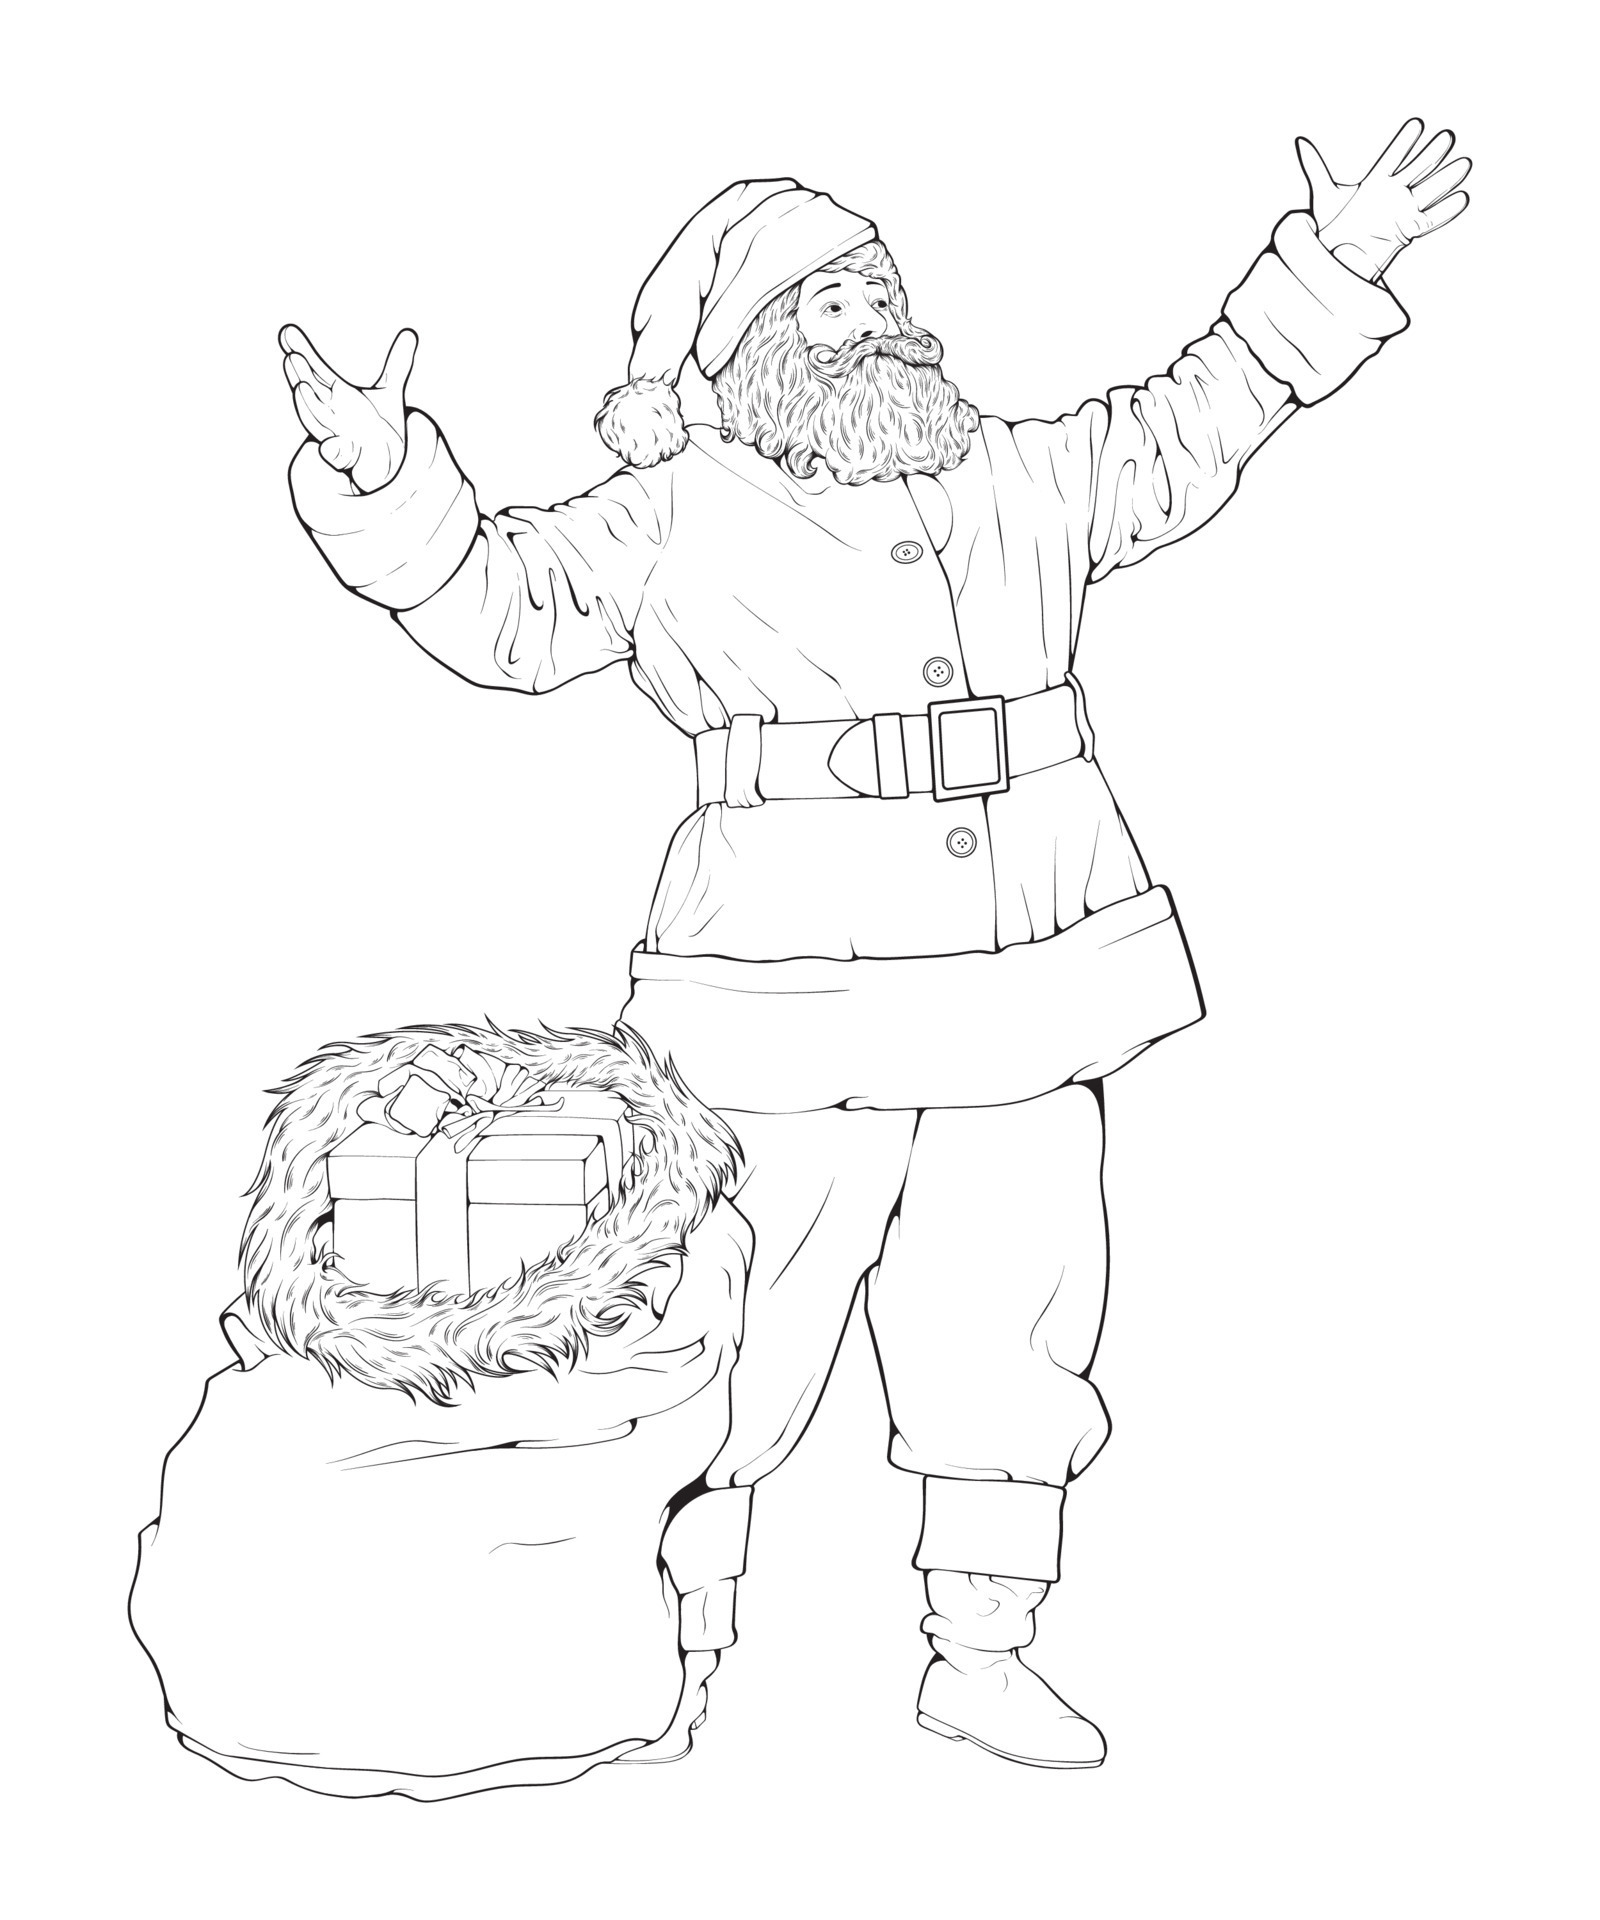 How to draw Santas face  Sketchok easy drawing guides